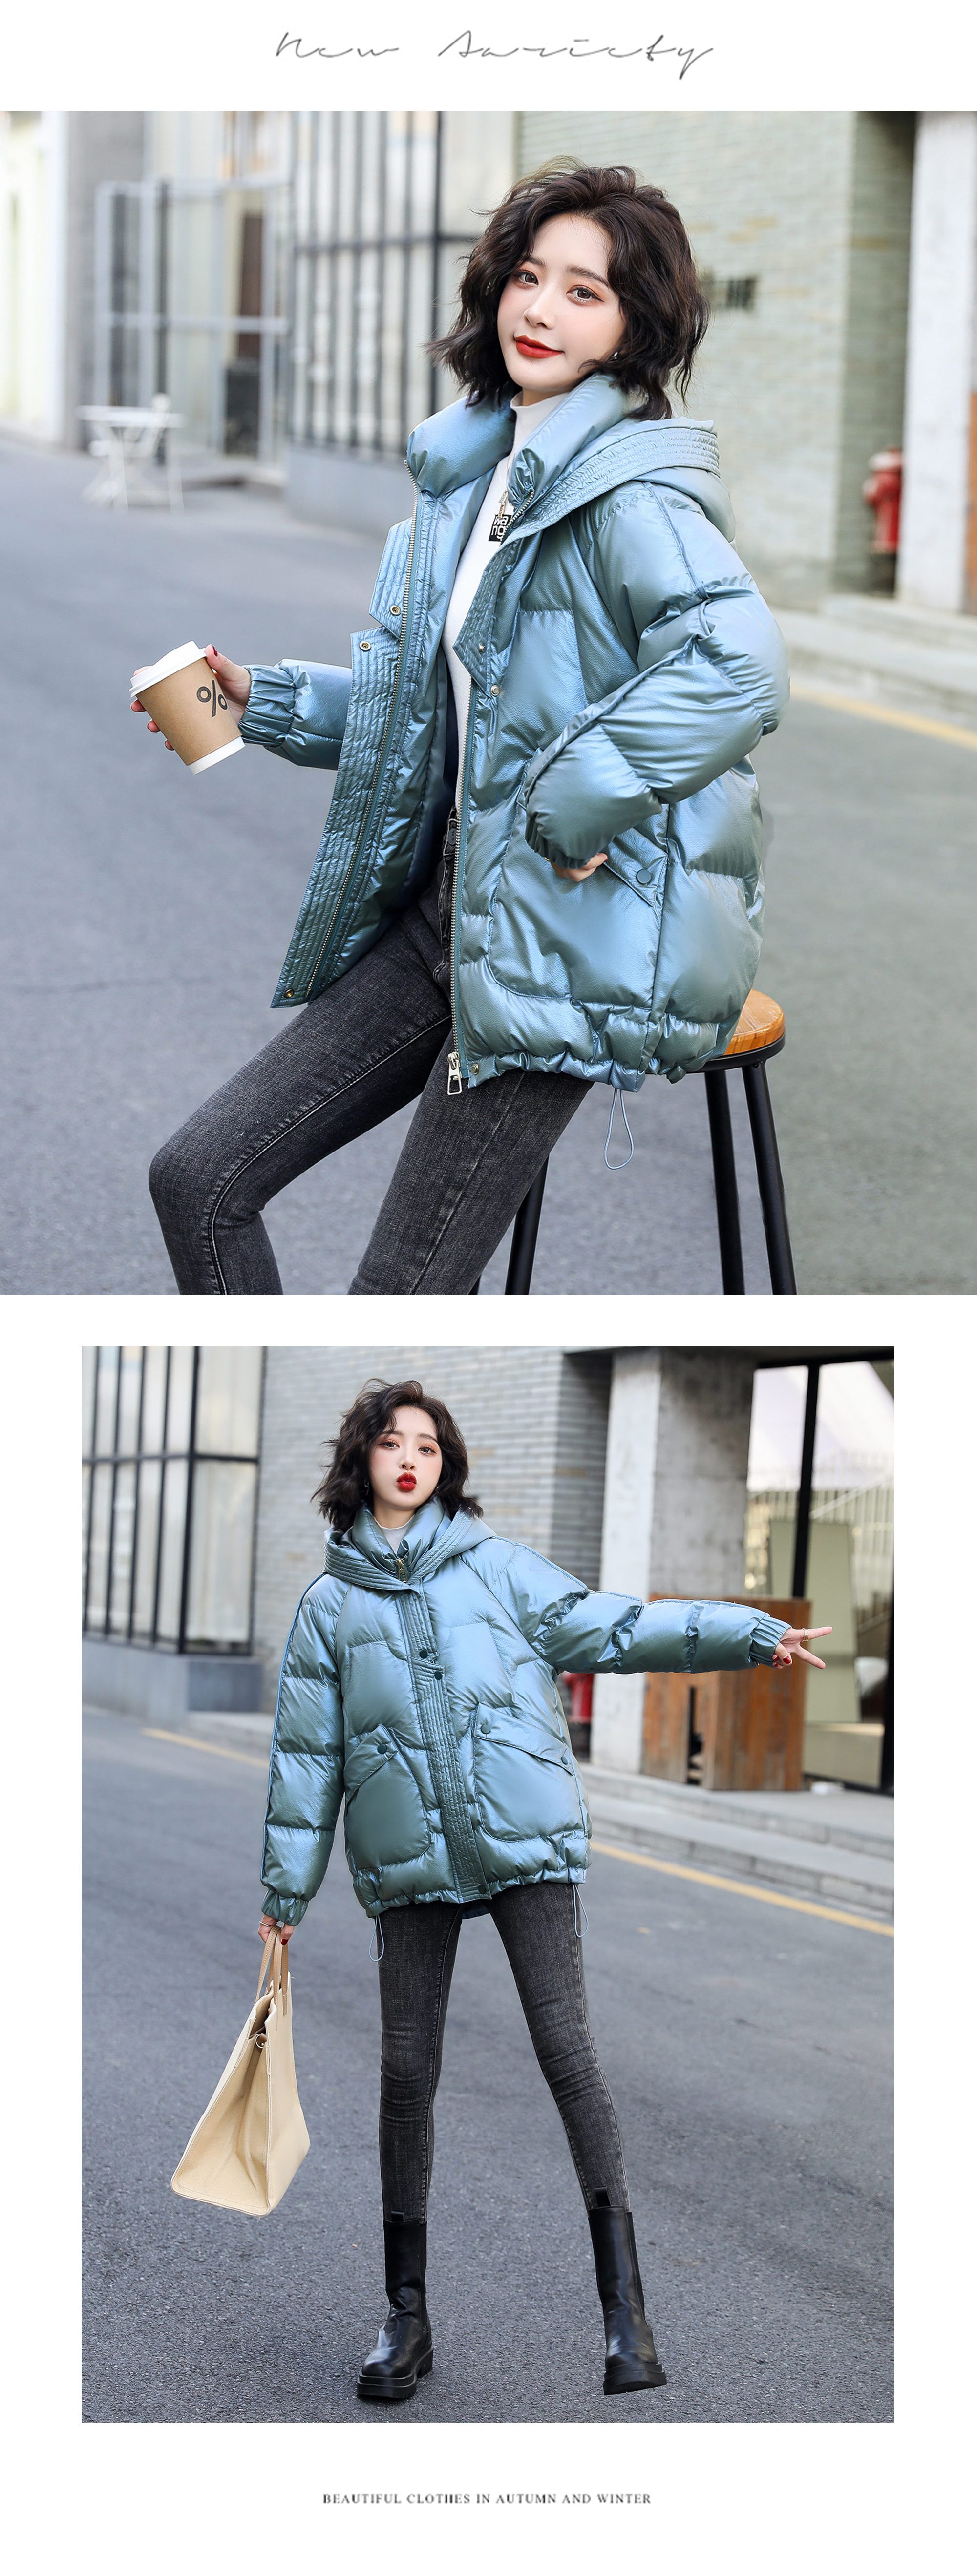 Fashion Hooded Winter Outfit Cotton Short Down Jacket14